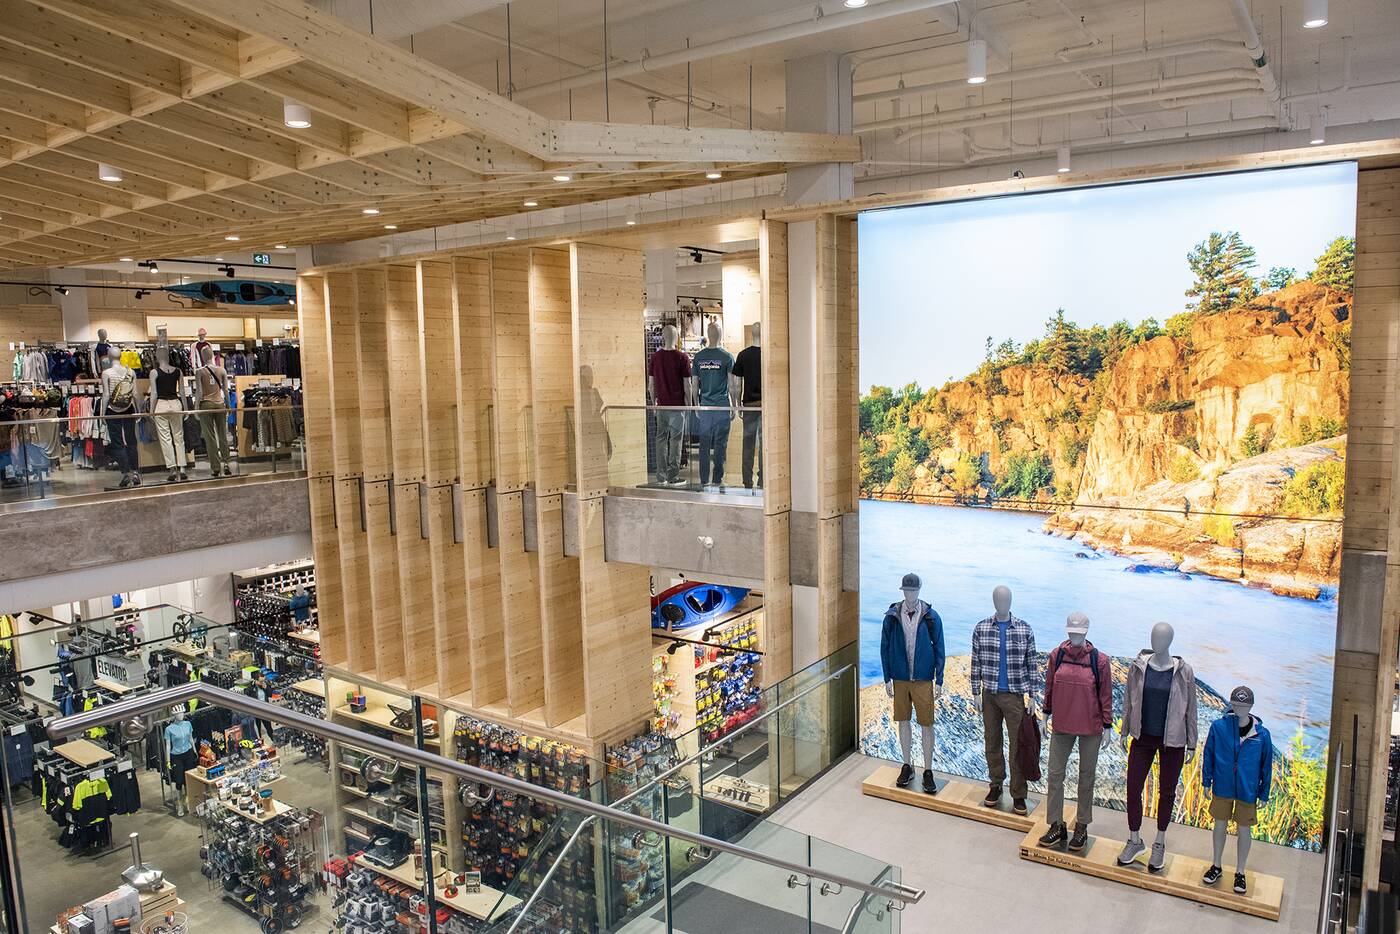 The top 30 stores for warm winter clothing in Toronto